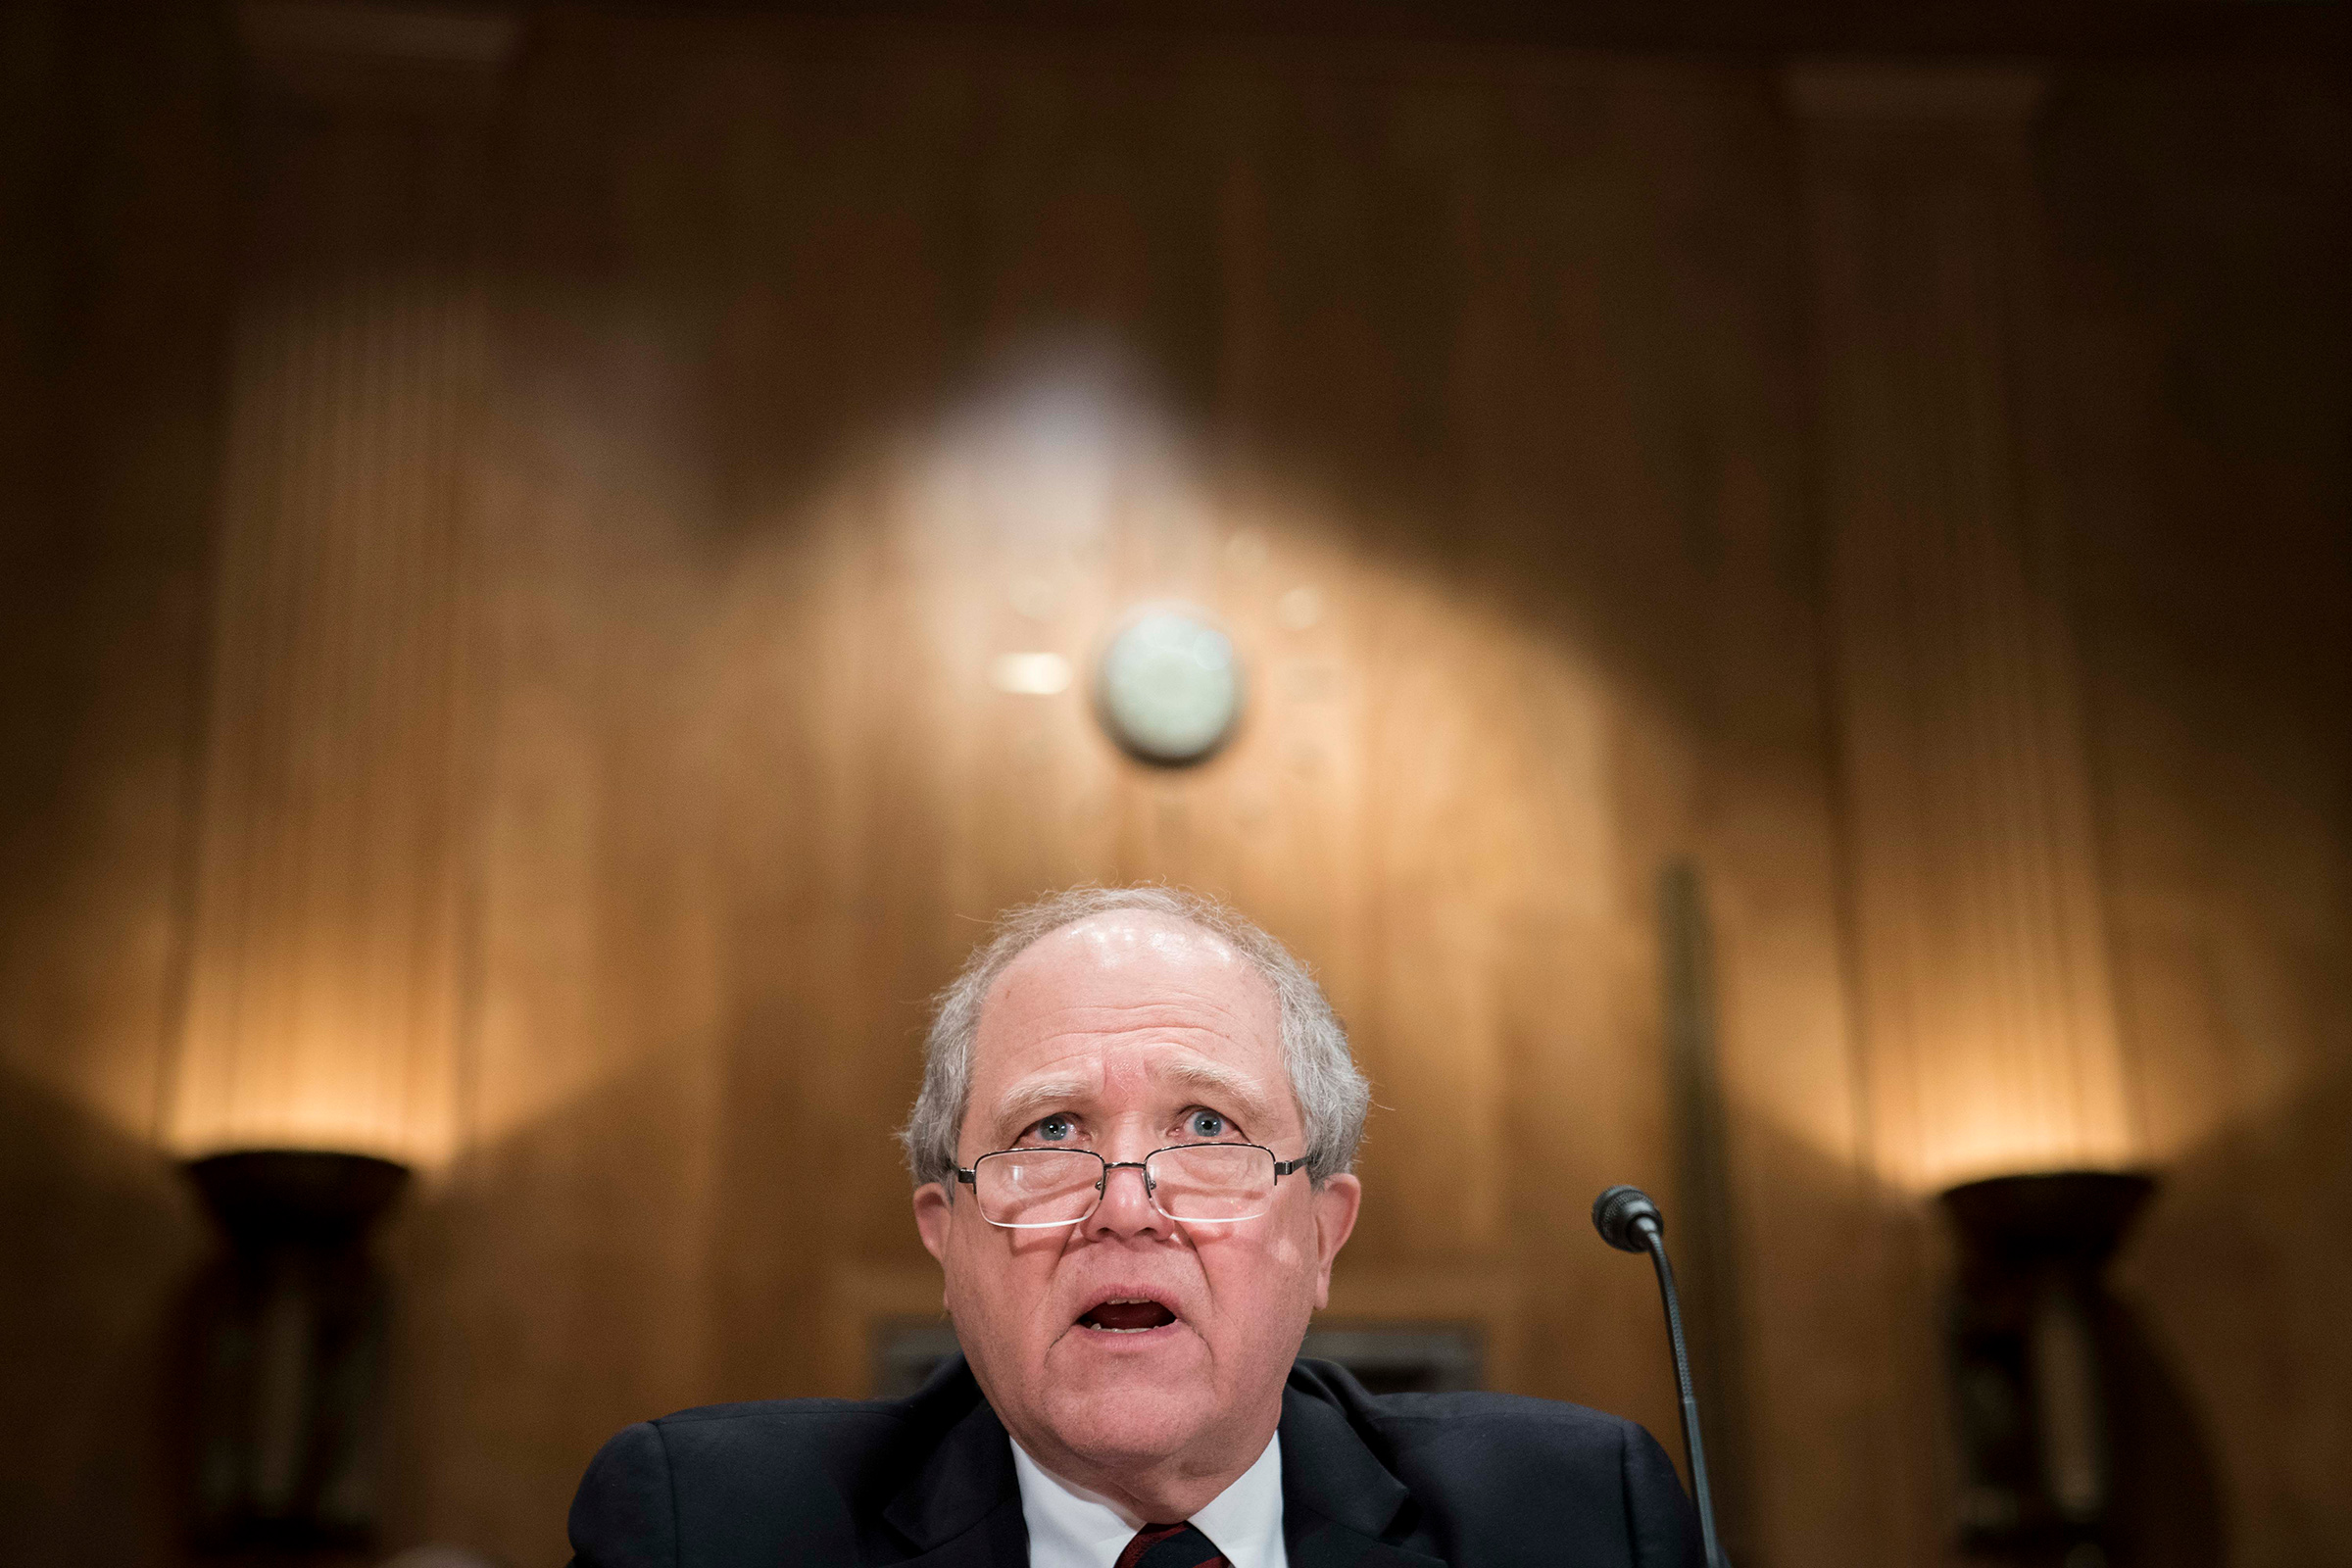 John F. Sopko, Special Inspector General for Afghanistan Reconstruction, testifies before the Senate Homeland Security and Governmental Affairs Committee in Washington, D.C., on Feb. 11, 2020. (Sarah Silbiger—Getty Images)